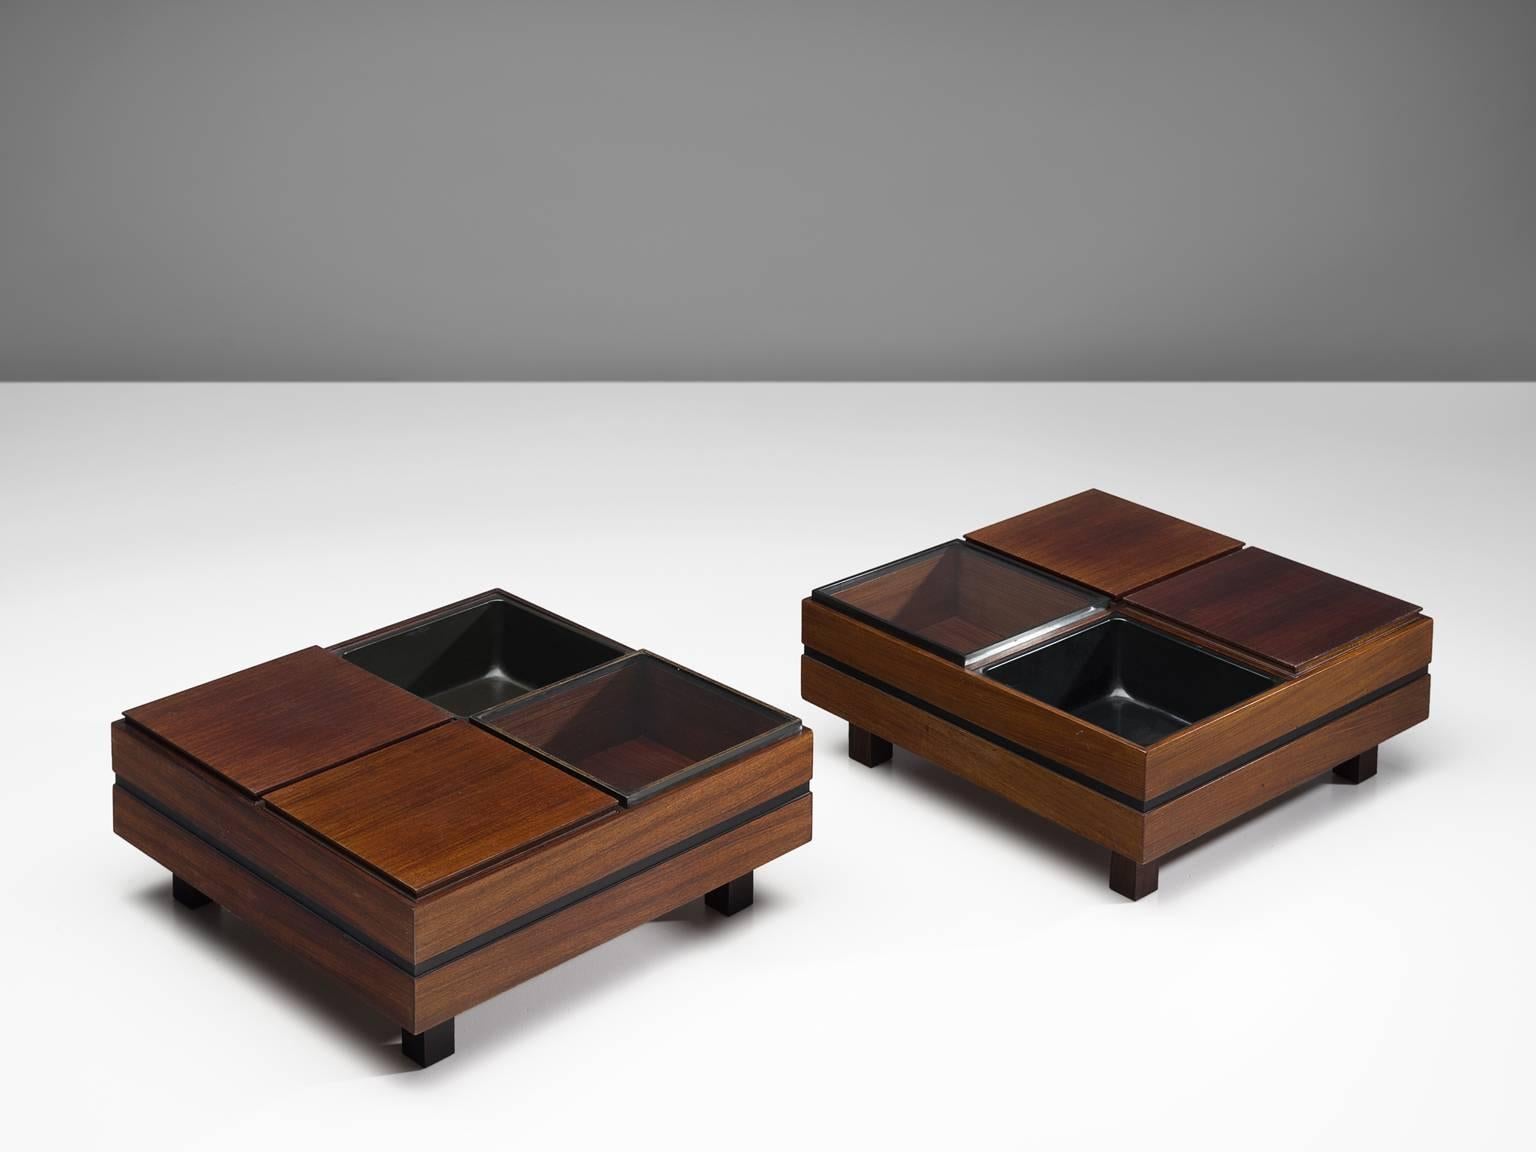 Produced by Sormani, pair of coffee tables, wood, glass, Italy, 1960s.

Architectural pair of side tables executed with four square elements each. The tables consist of a one empty element, one glass element and two wooden elements. The base of the